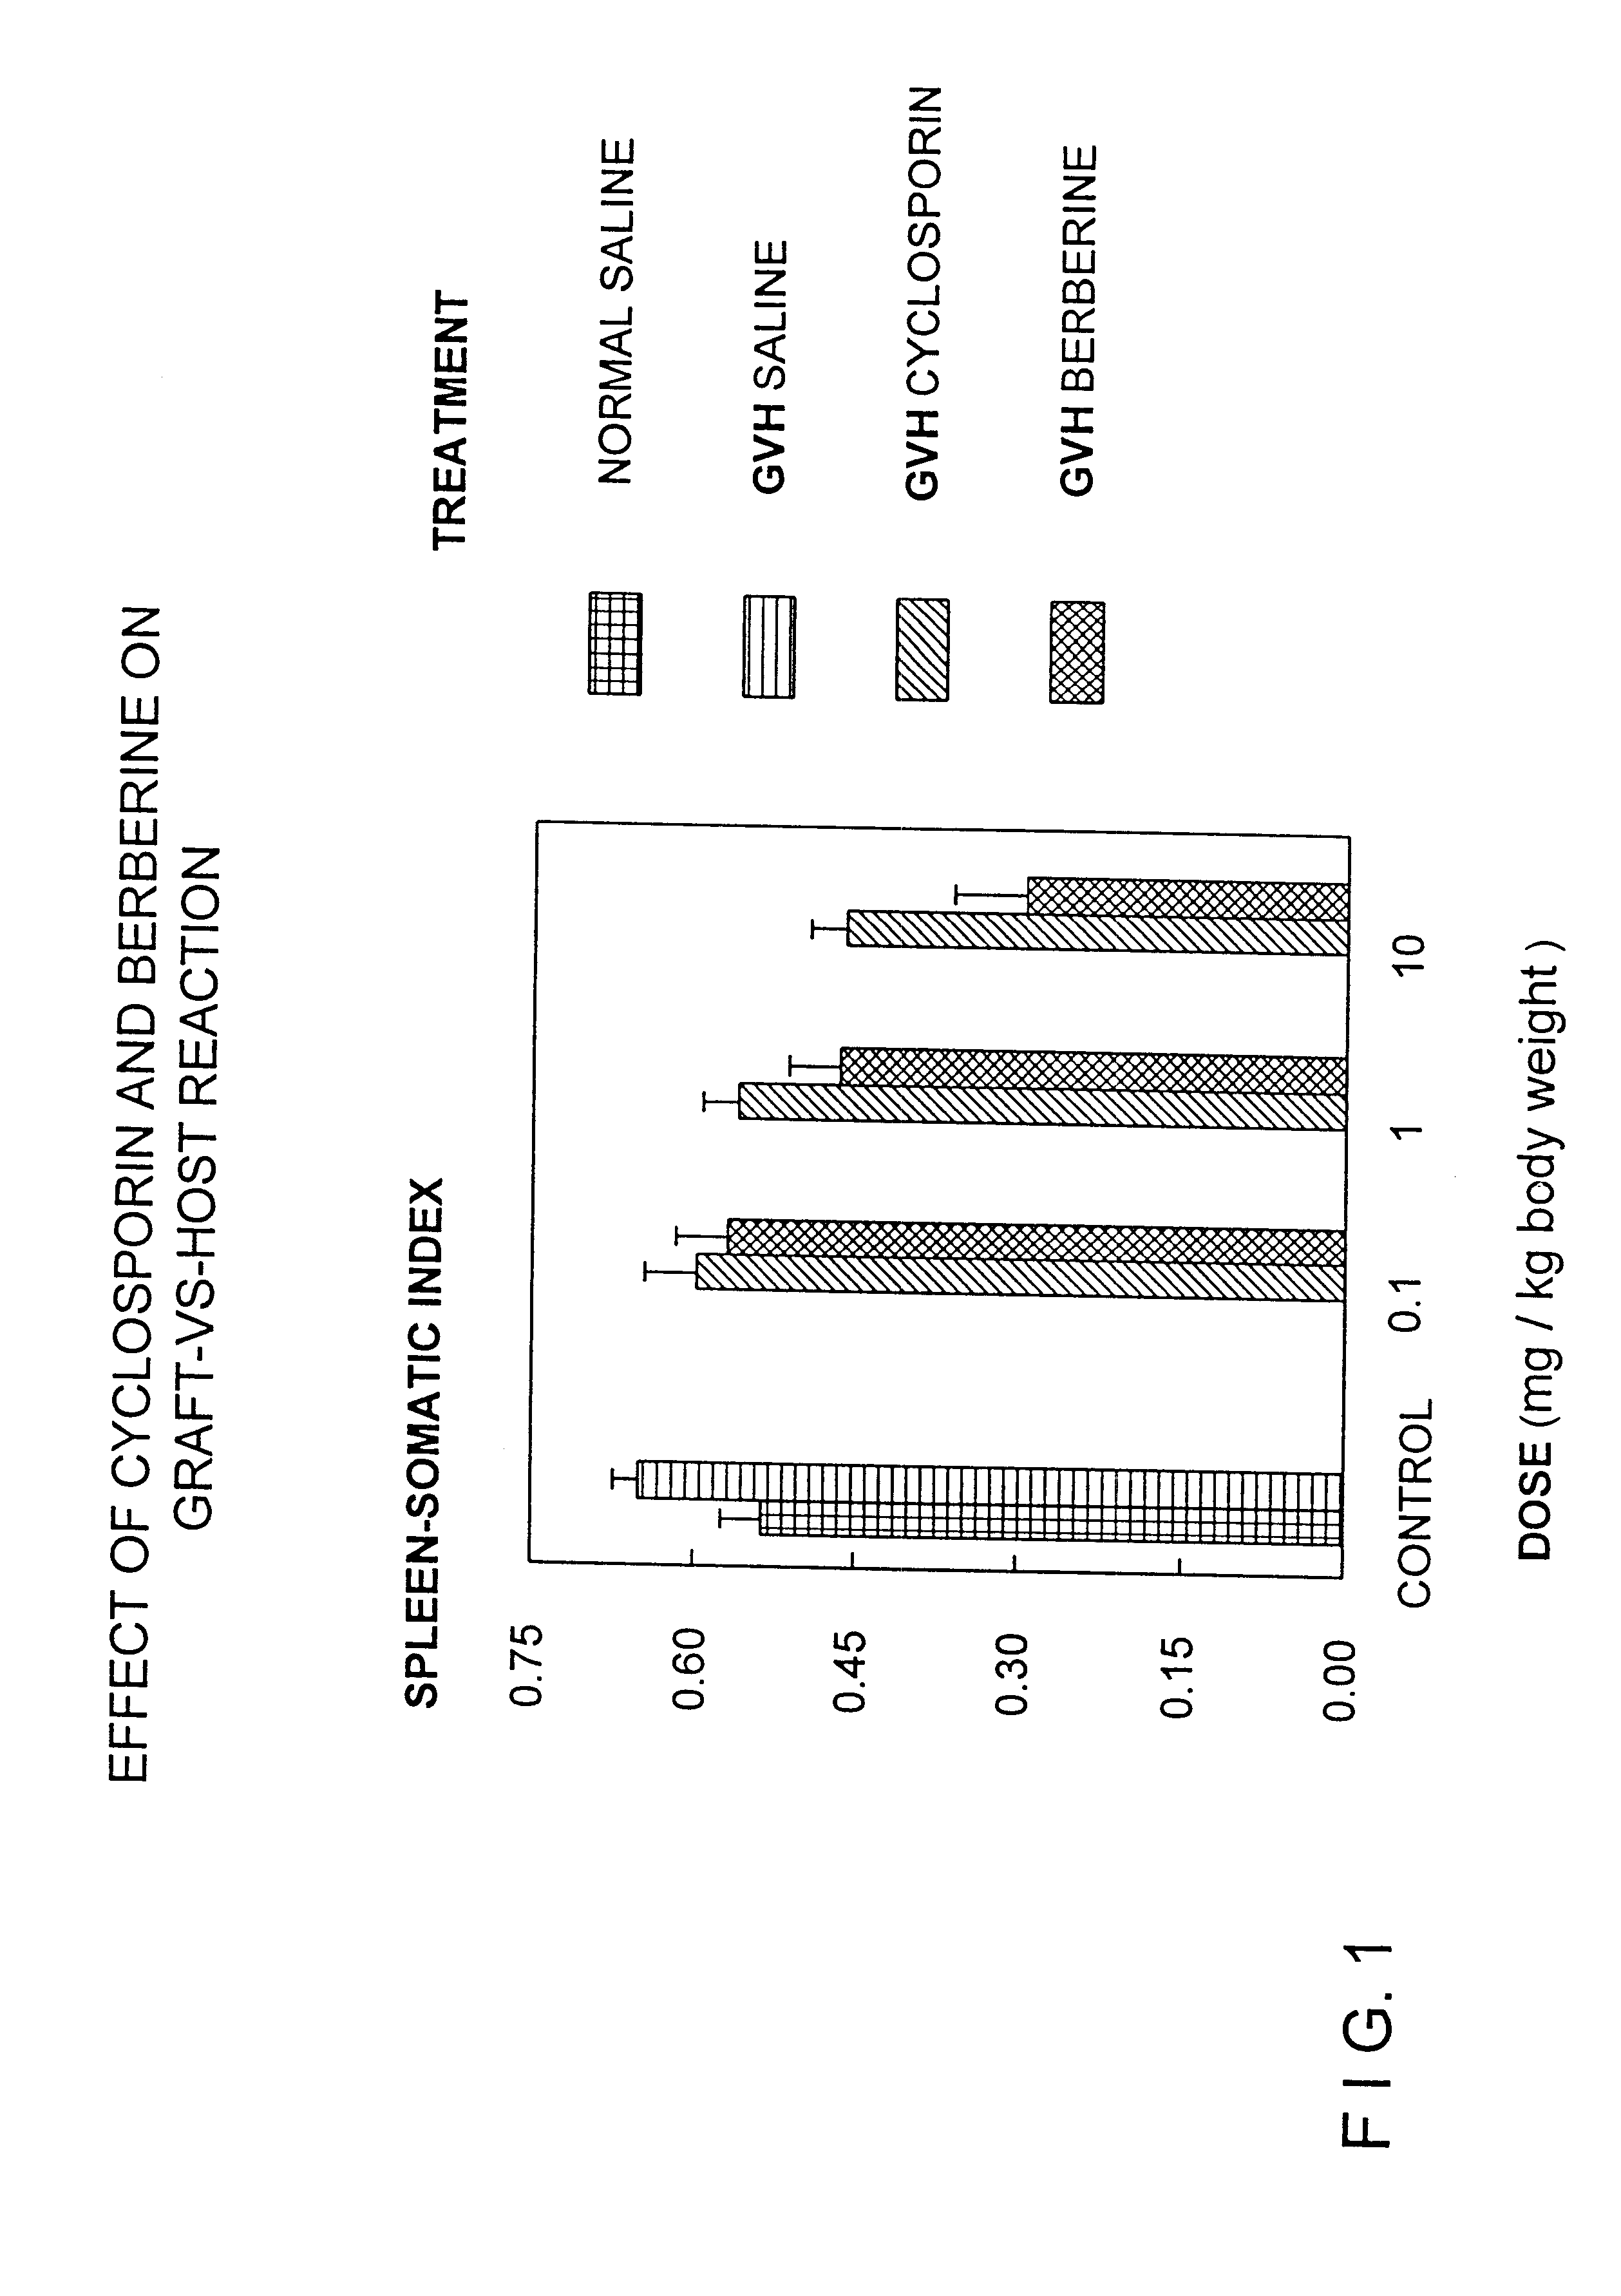 Methods for prevention and treatment of septic shock